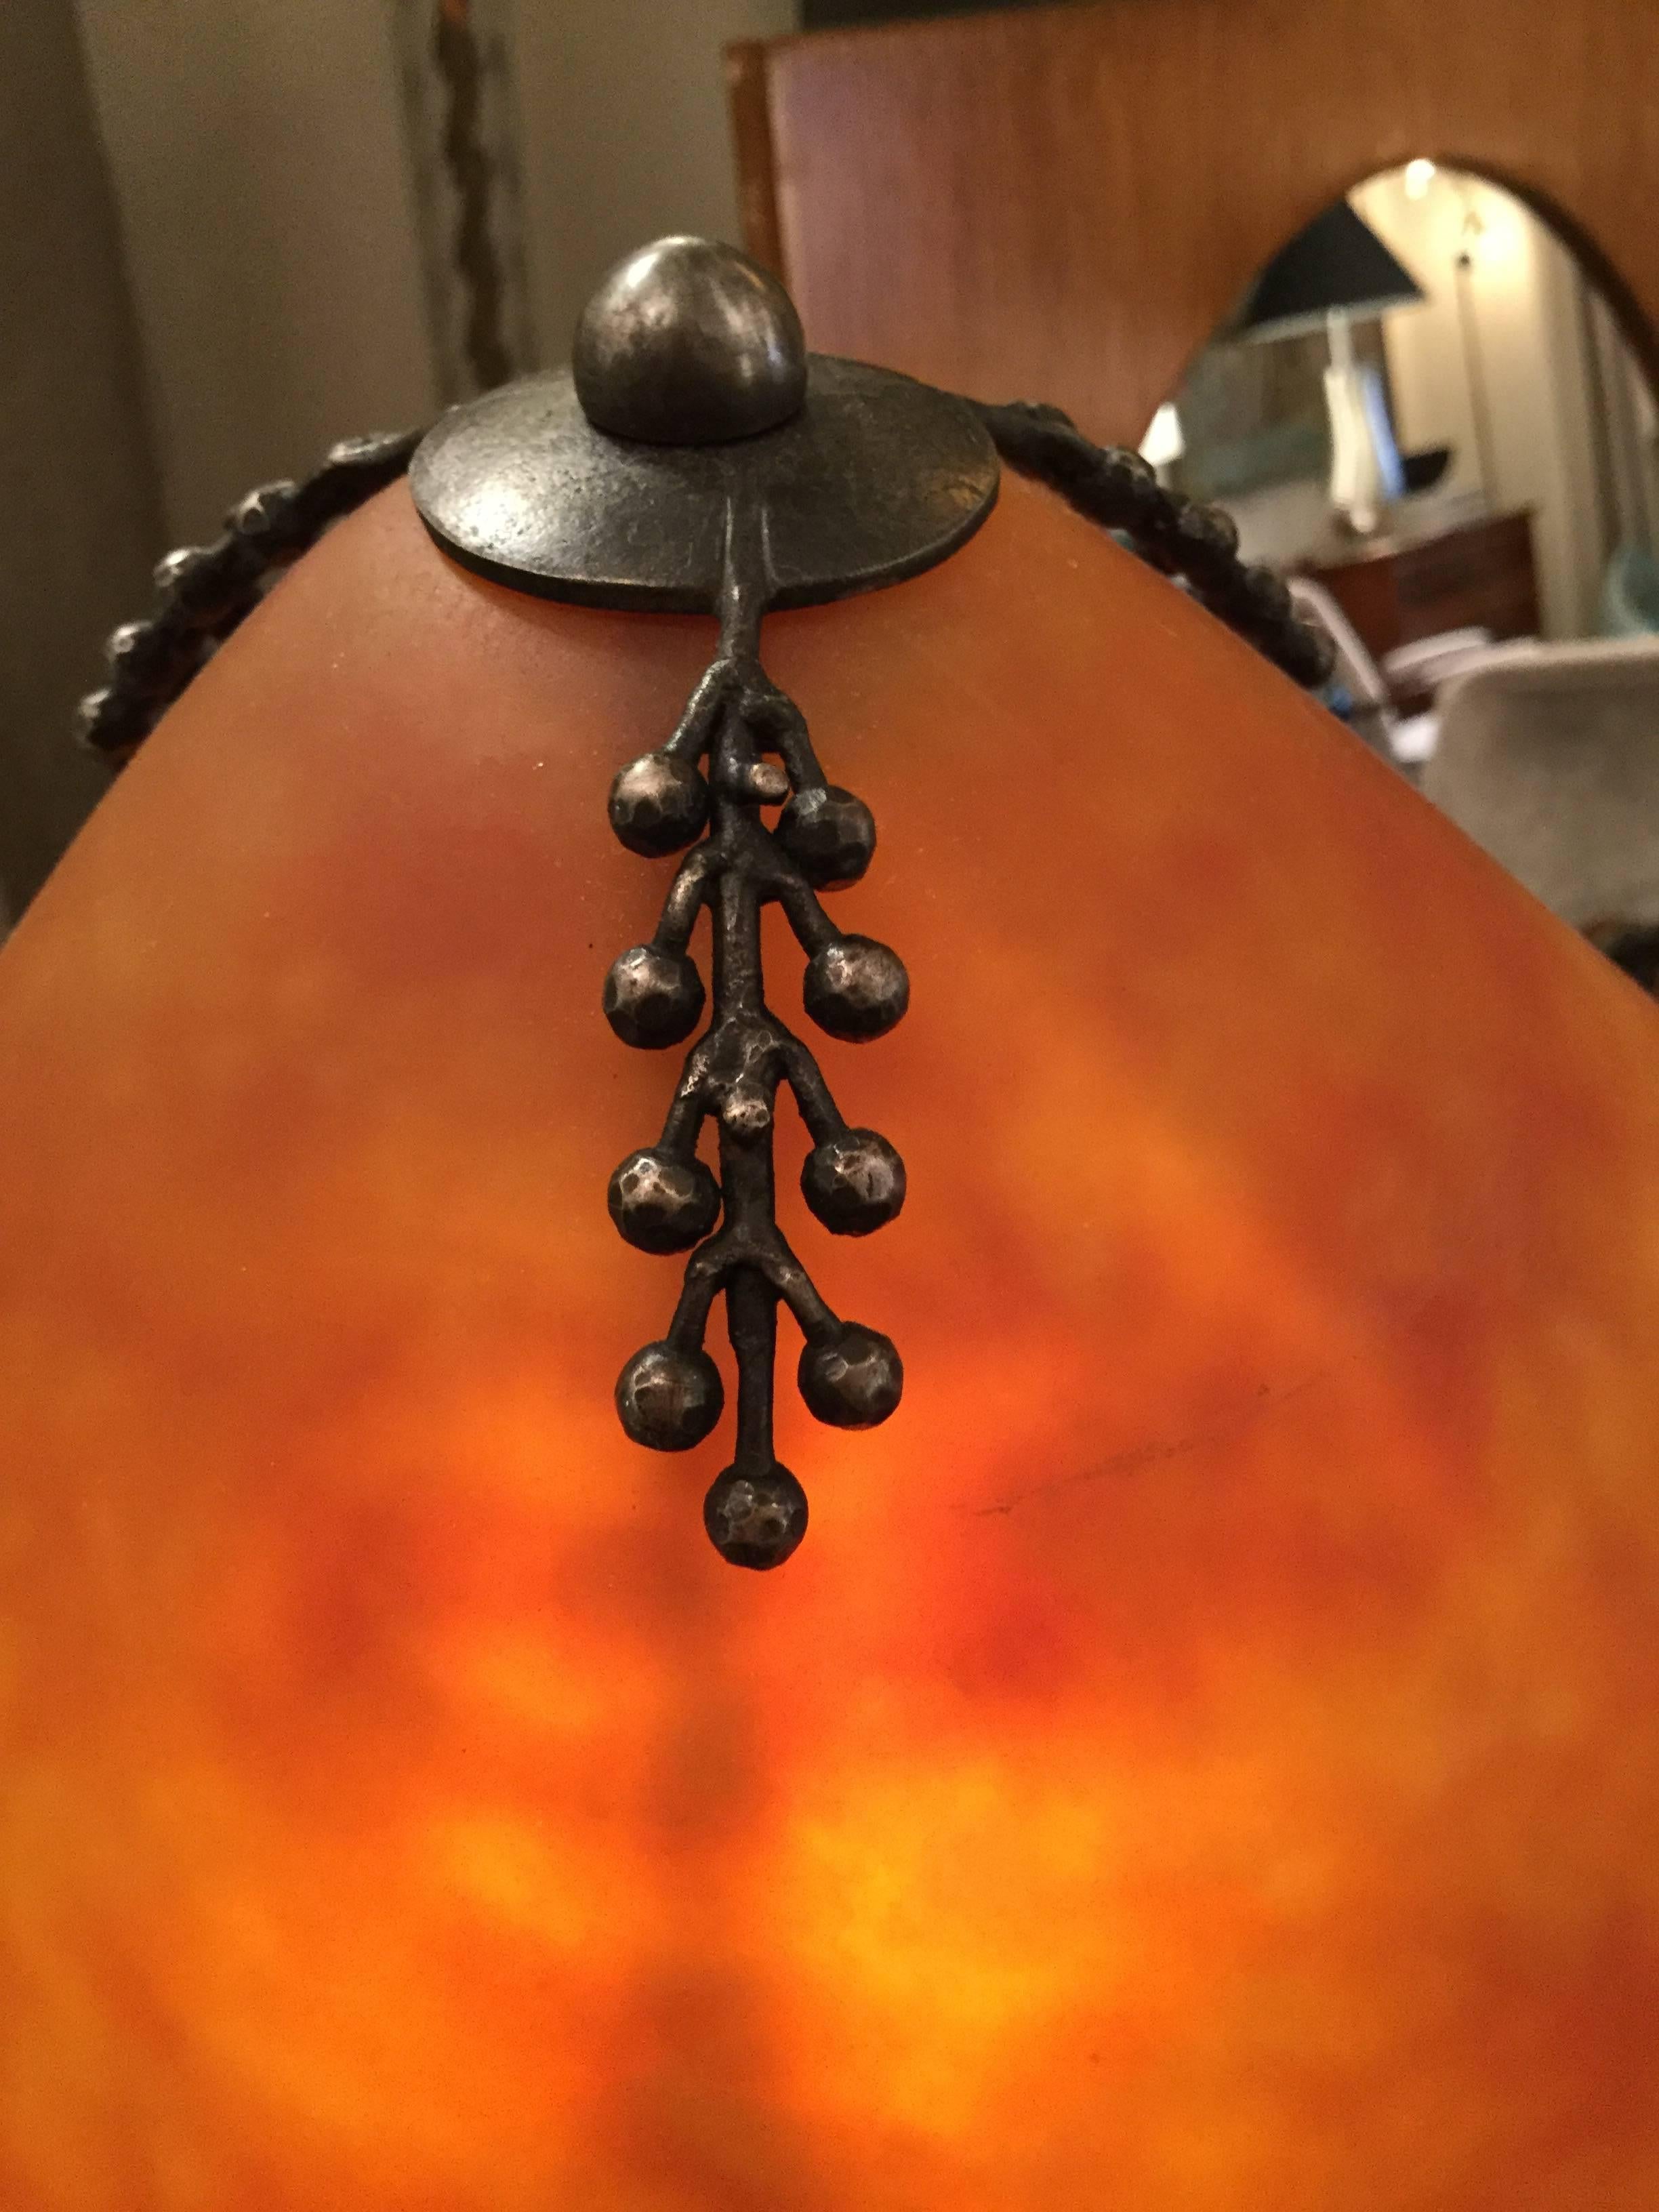 Wrought iron composed of coils and beads on a flattened cone base. Conical lampshade and inner reflector in orange opalescent glass by Daum. Stamped “E Brandt” on foot and etched “Daum Nancy” on the reflector.
Similar model pictured in Clotilde